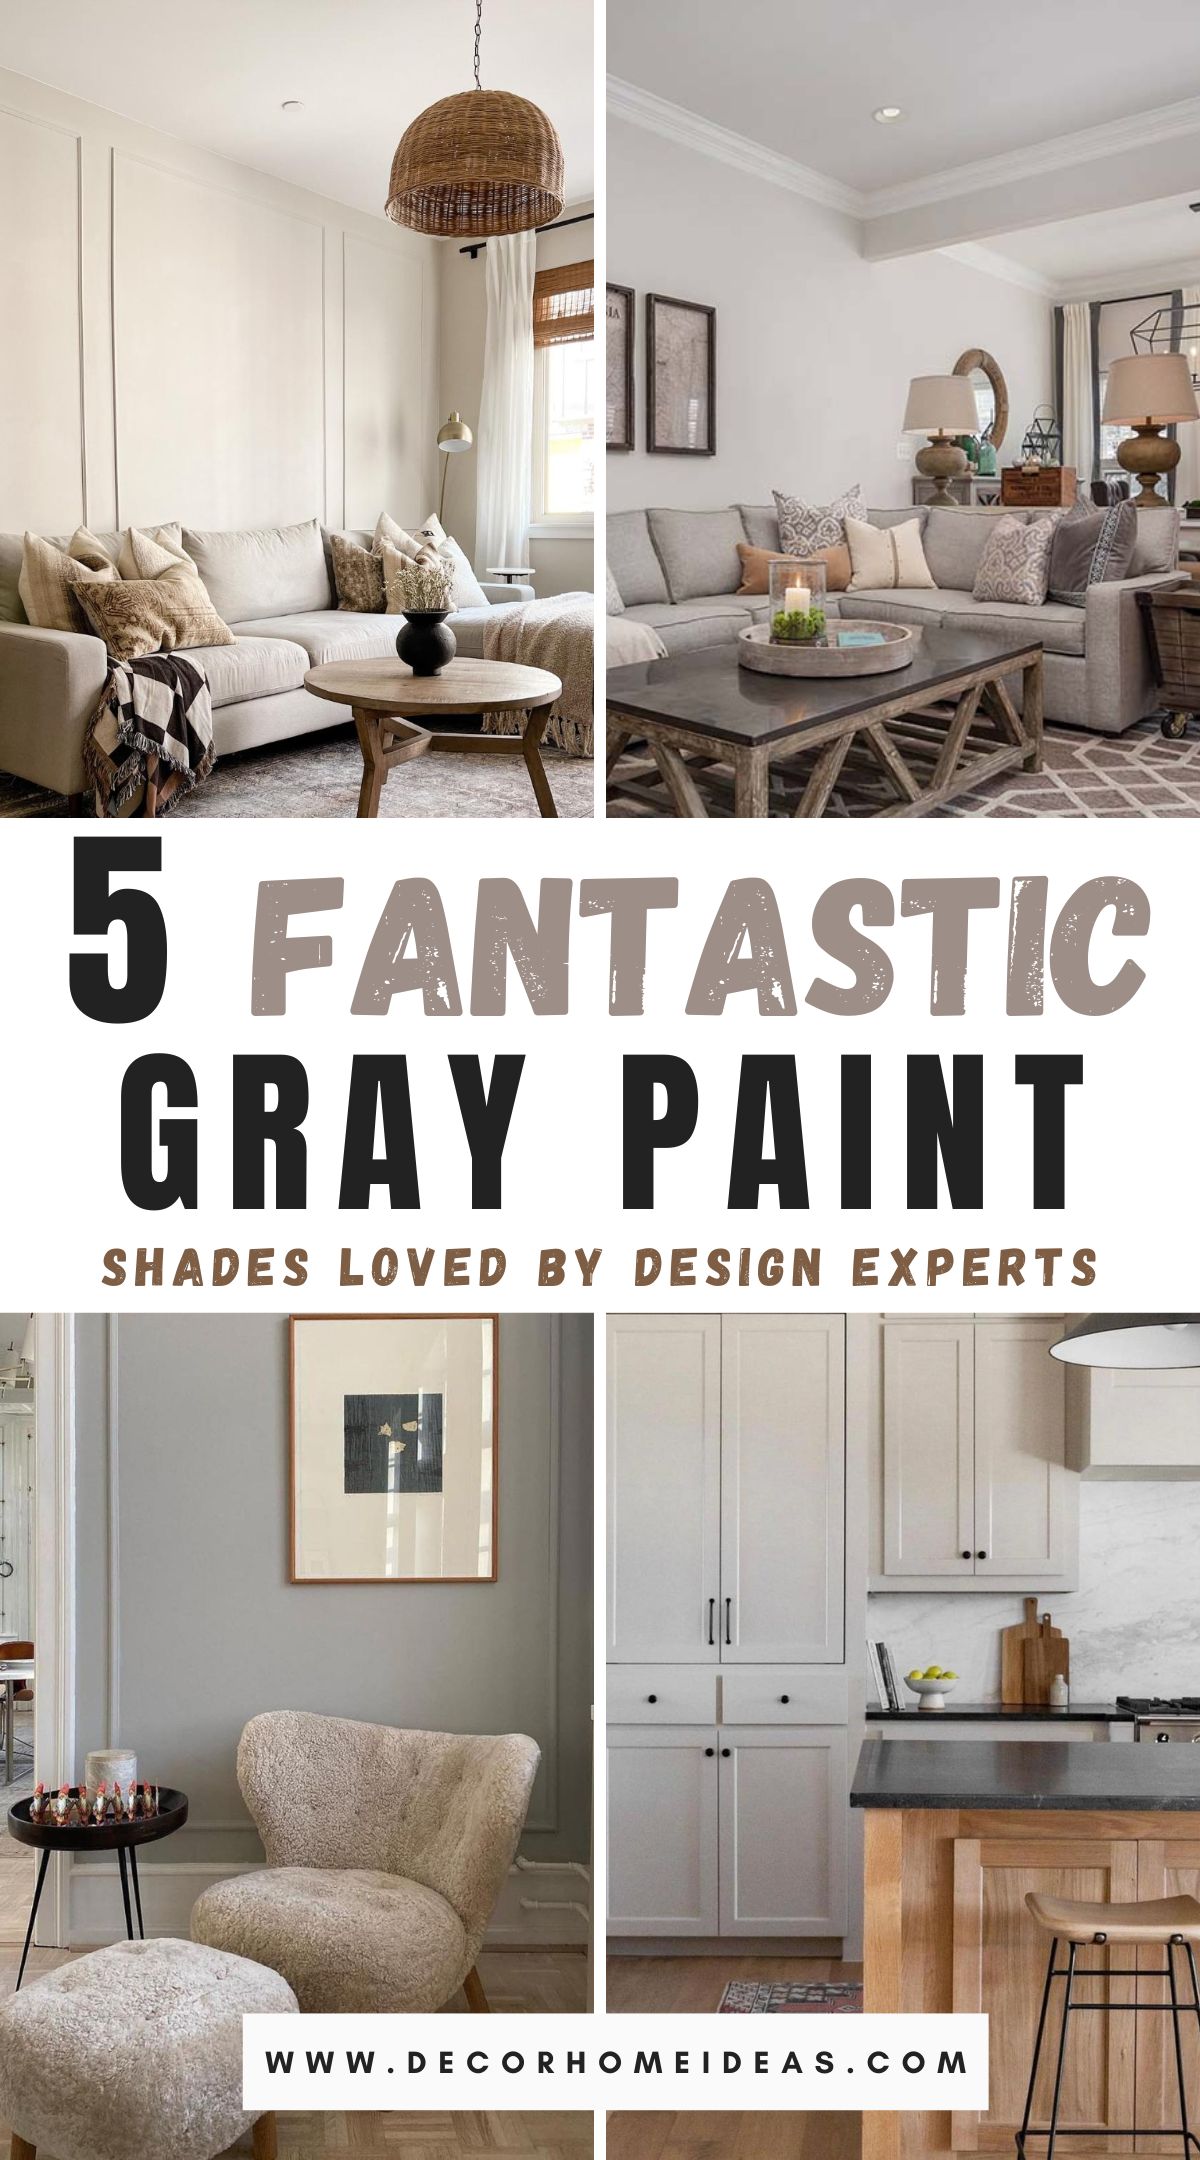 Explore the top 5 gray paint shades beloved by interior designers. From soothing neutrals to chic charcoal hues, uncover the most coveted colors that add sophistication and versatility to any space, providing a timeless canvas for your interior design vision.